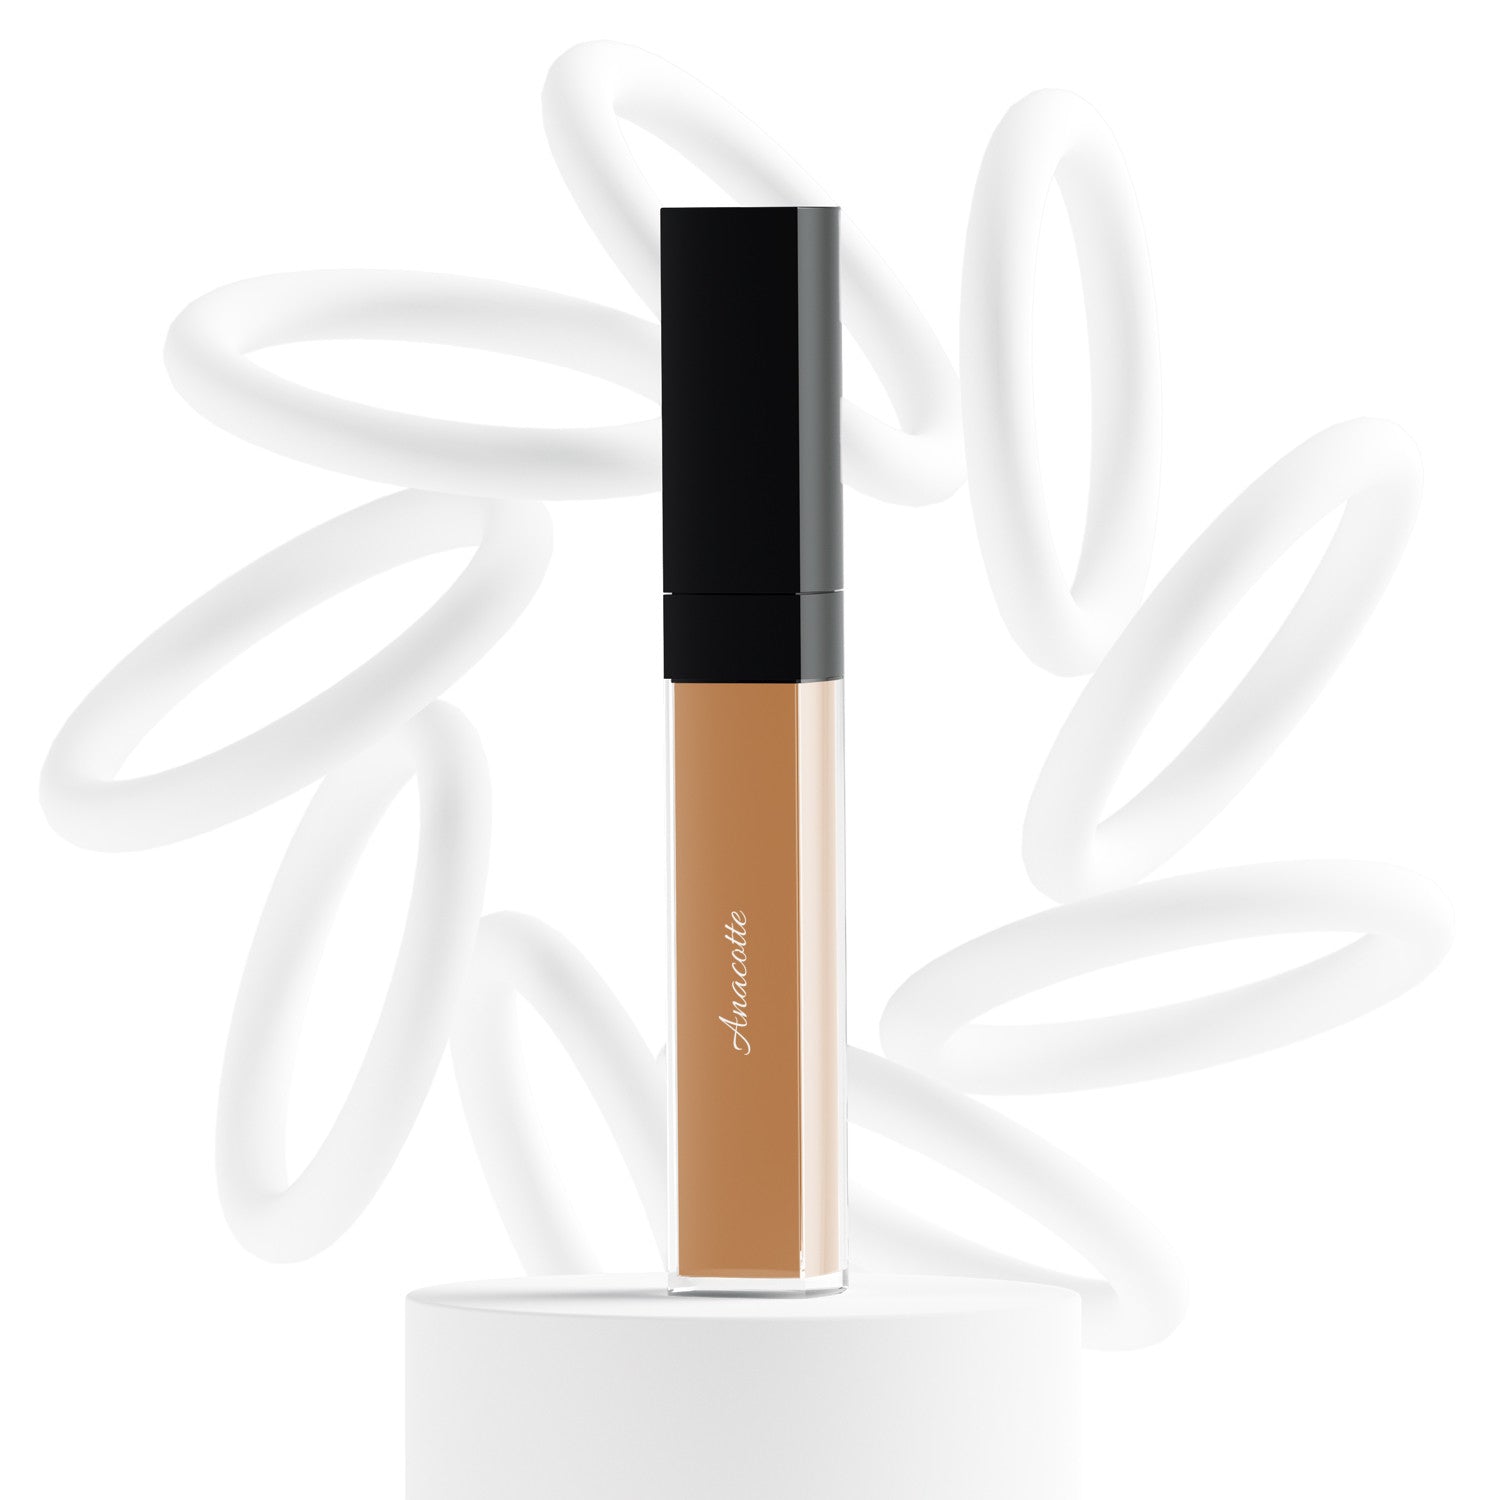 Anacotte's Warm-Tone Concealers for Flawless Skin